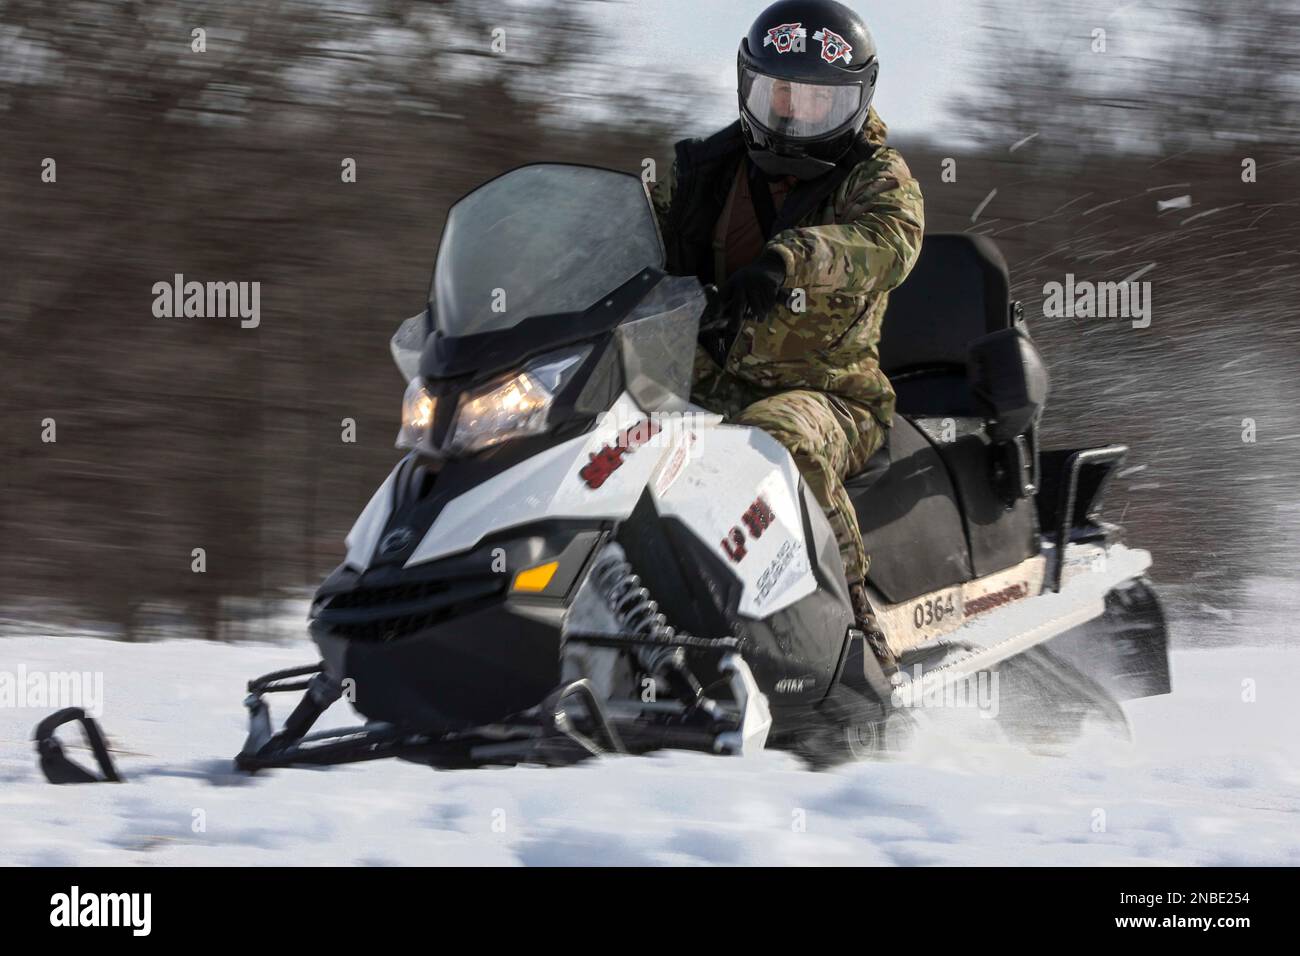 LITTLE FALLS, Minn. (Feb. 9, 2023) – A U.S. Navy Explosive Ordnance Disposal (EOD) Technician, assigned to EOD Mobile Unit Two, drives a snowmobile during Arctic mobility training in Little Falls, Minnesota, Feb. 9, 2023 during Snow Crab Exercise 23-1, an exercise designed to test and evaluate U.S. Navy Explosive Ordnance Disposal’s (EOD) and Navy Diver’s capabilities and equipment in a simulated Arctic environment and improve combat effectiveness. Navy EOD and Navy Divers are part of the Navy Expeditionary Combat Force (NECF), enabling the U.S. Navy Fleet by clearing and protecting the battle Stock Photo